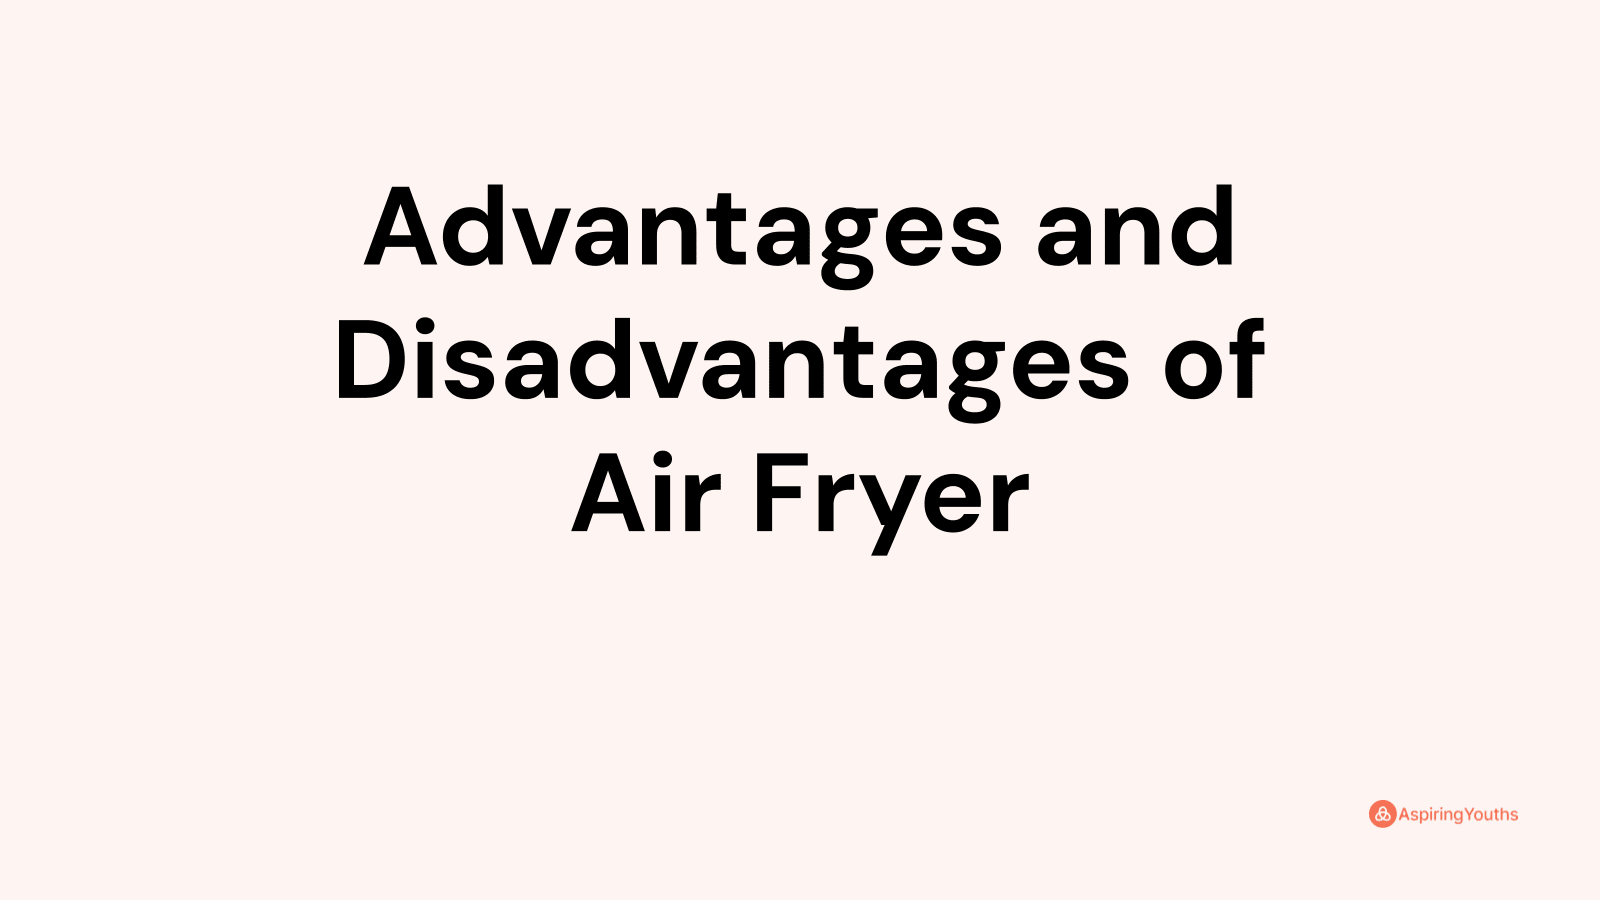 Advantages and disadvantages of Air Fryer